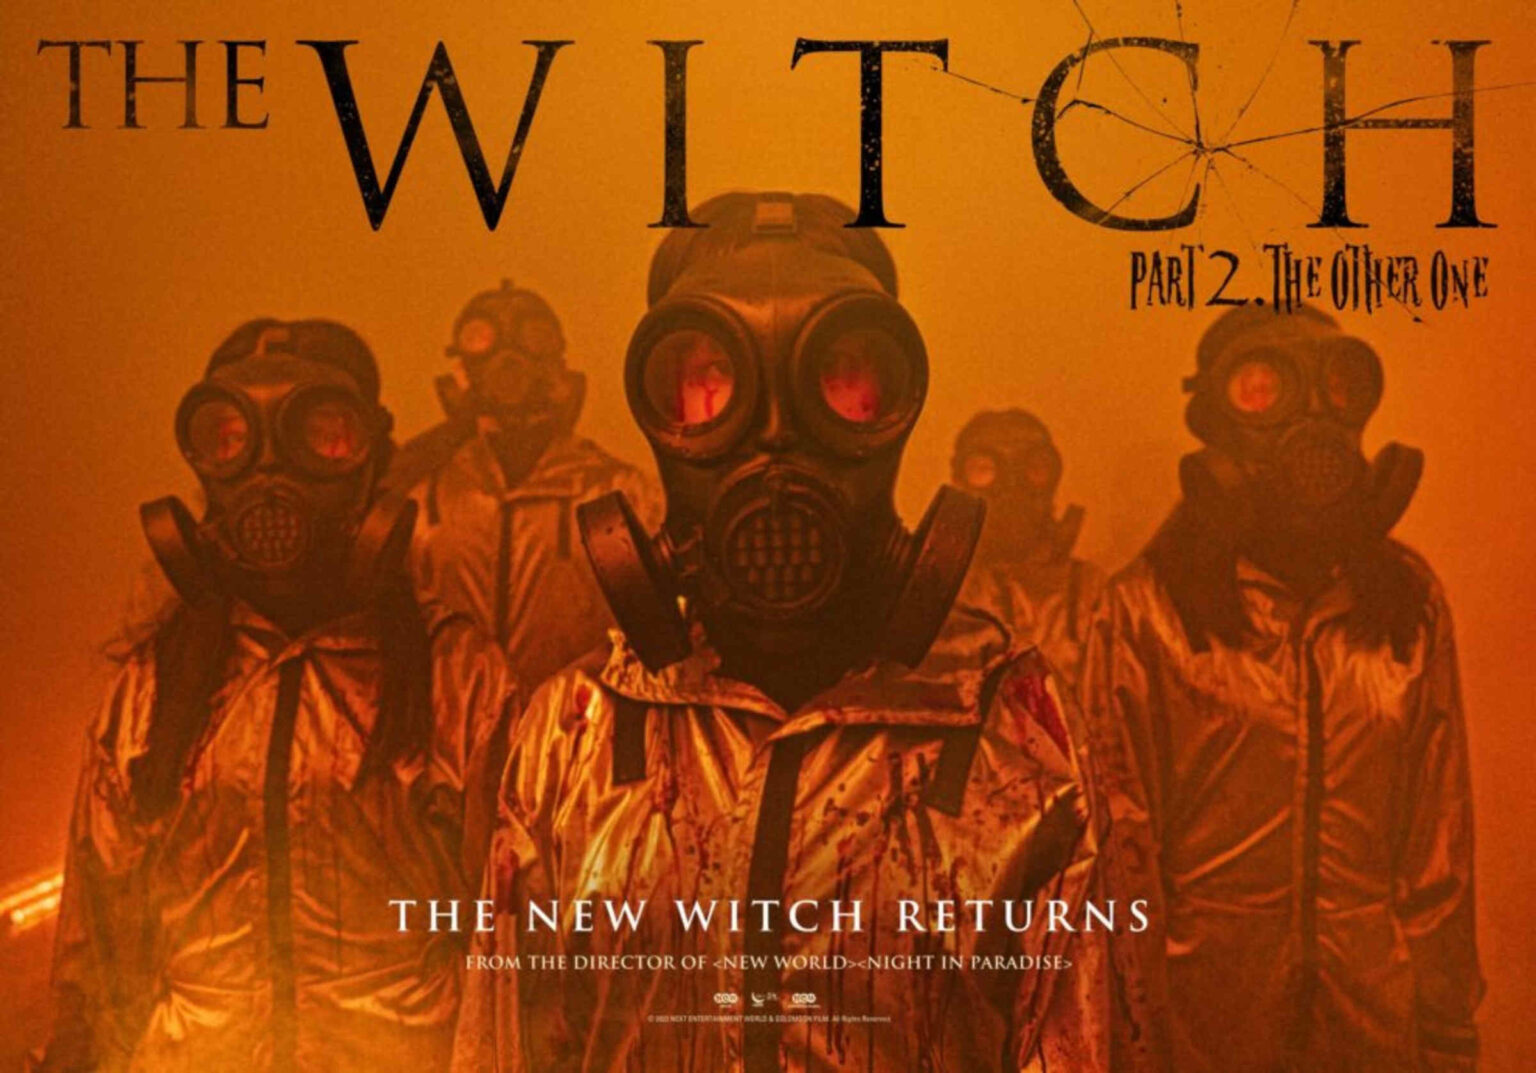 ‘The Witch Part 2. The Other One’ is Finally here. Find out where to watch The Witch Part 2 online for free.